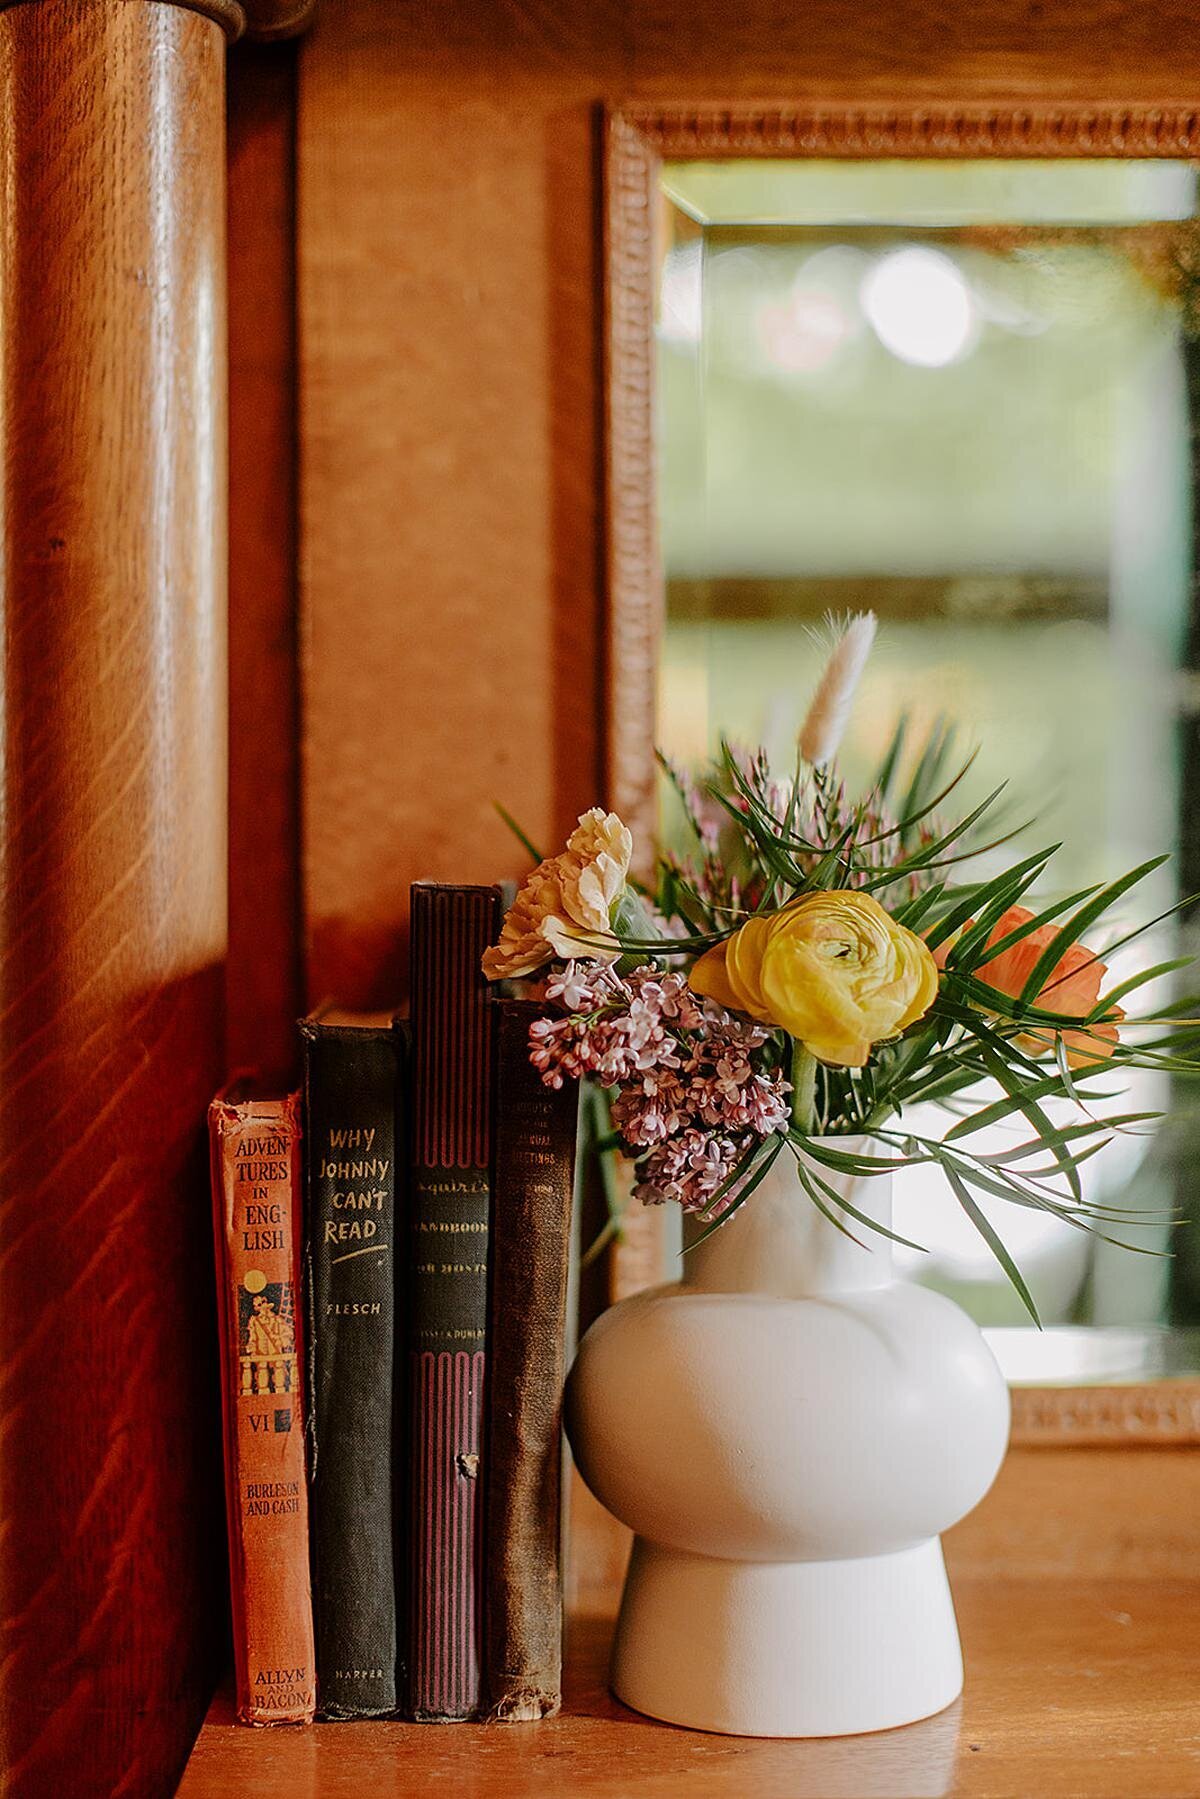 A rounded white ceramic vase sits on a light wood window sill propping up four vintage books. The vase has purple wax flower, blush carnations, yellow ranunculus, and orange ranunculus with willow and greenery.